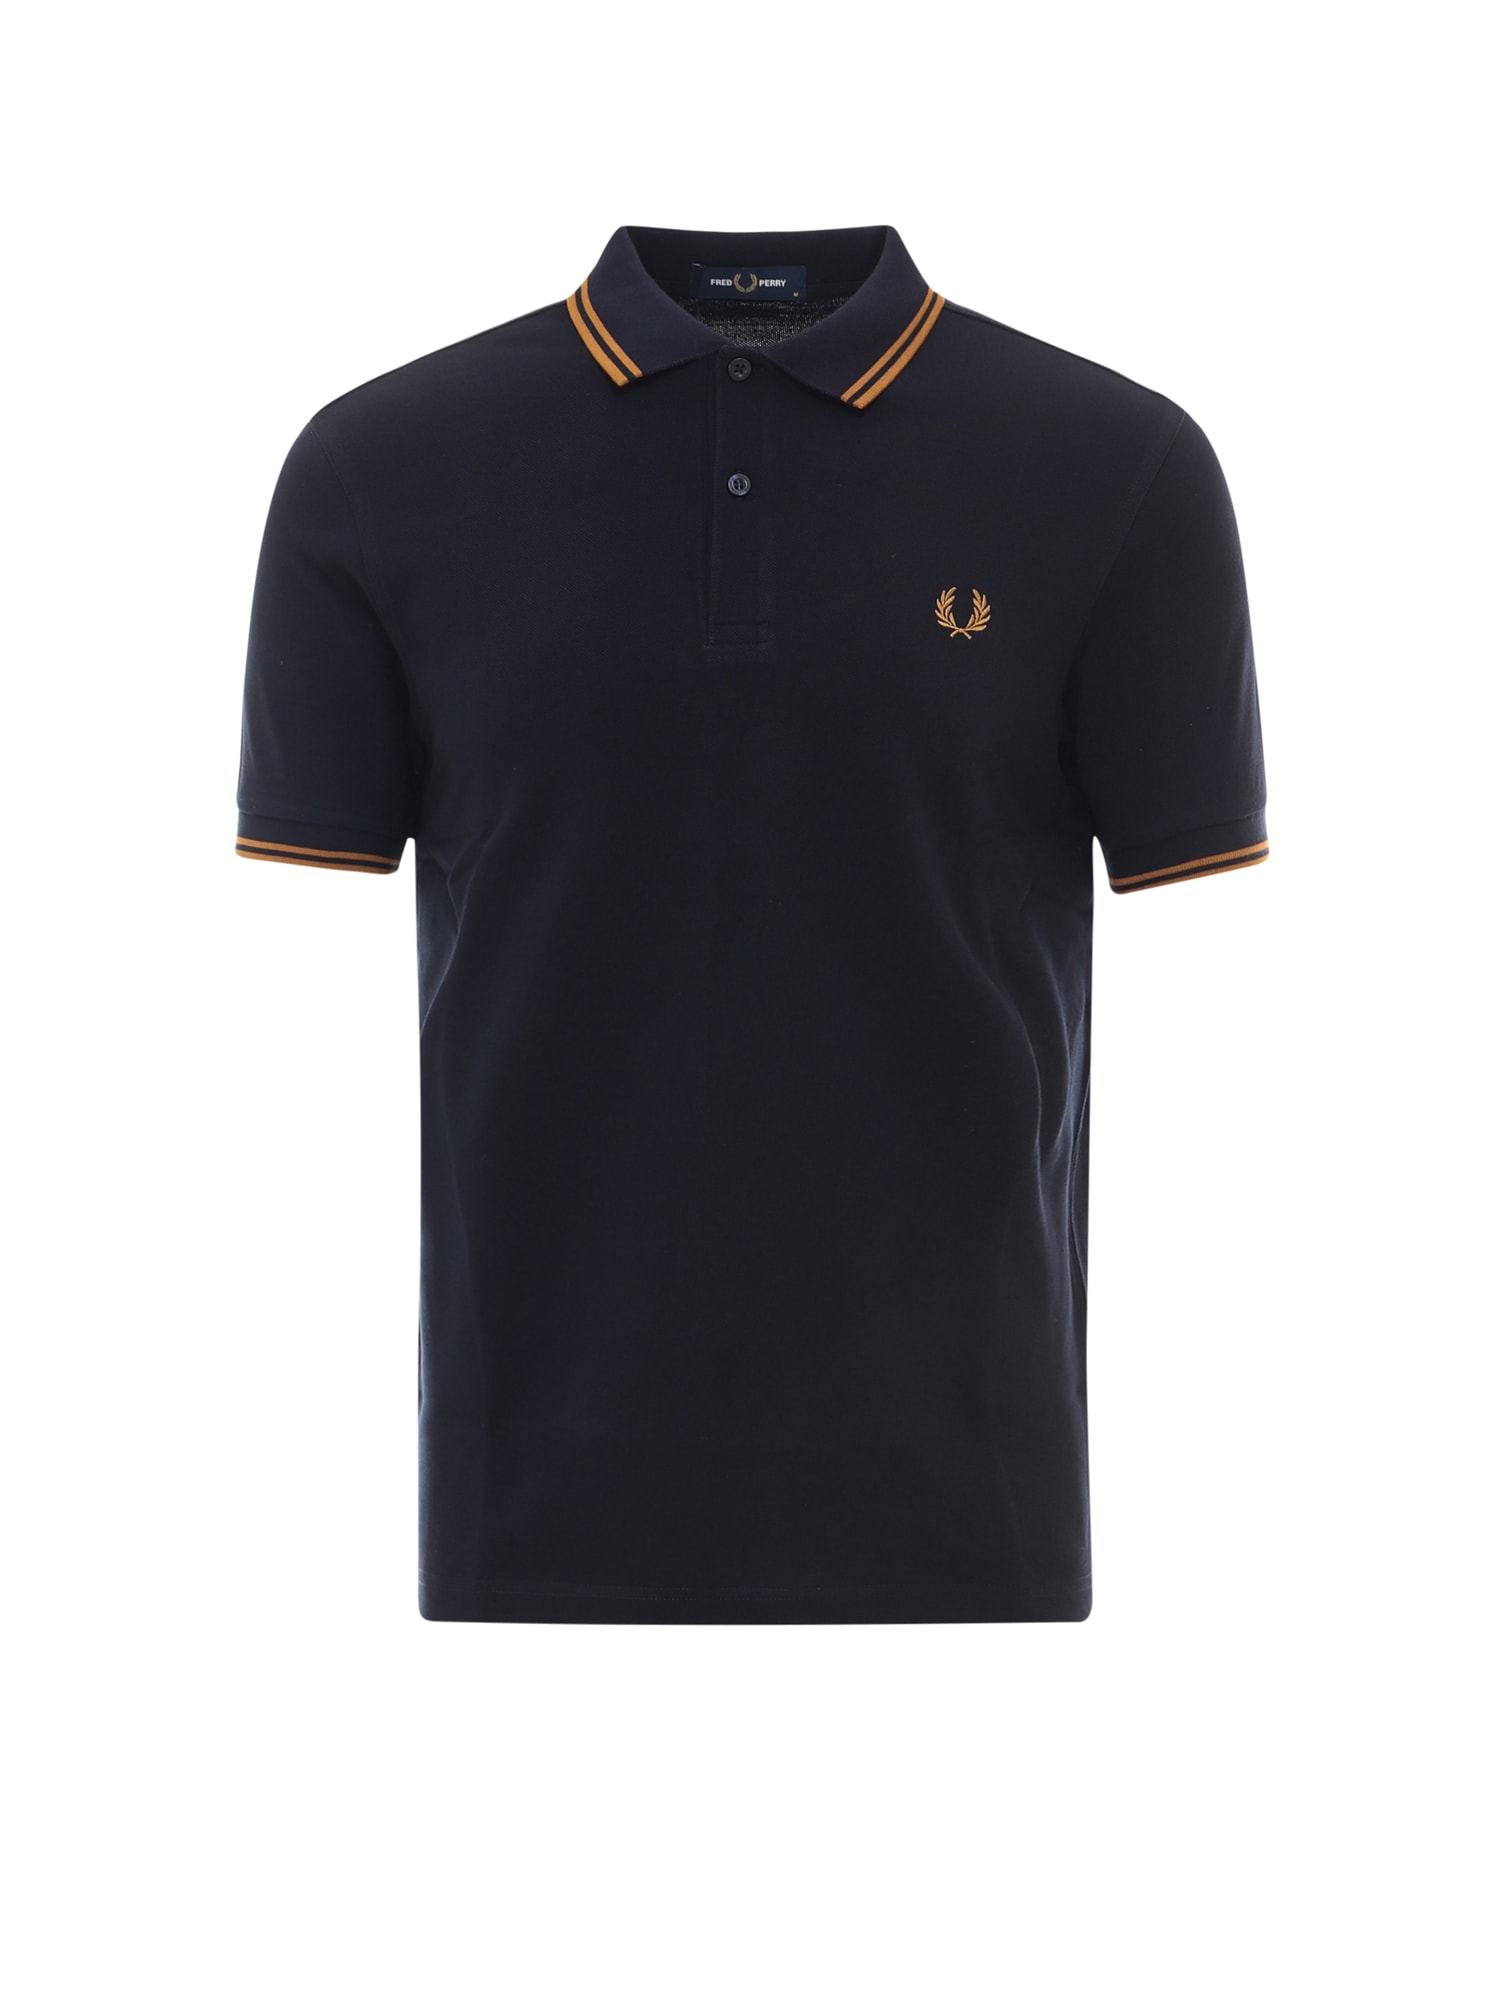 FRED PERRY POLO SHIRT,11885881